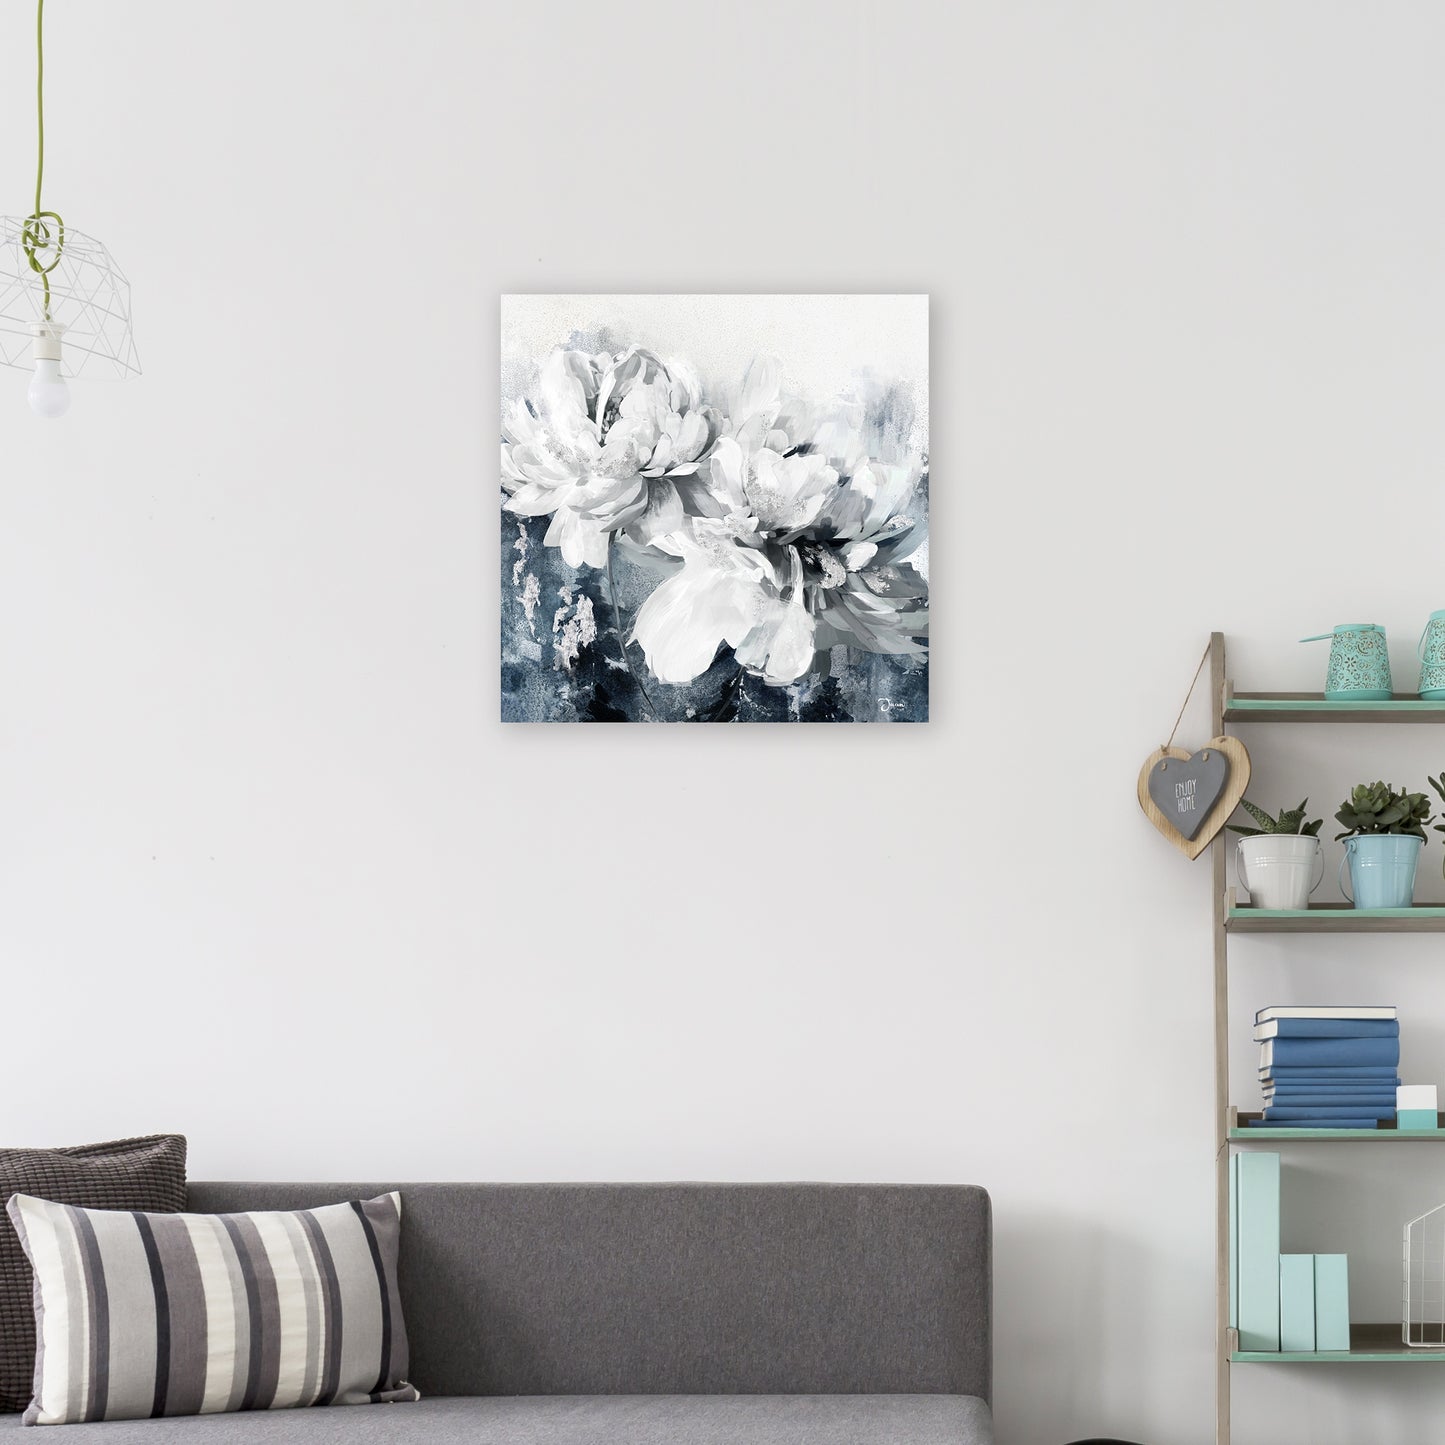 Classical Flowers Oil Painting on Wrapped Canvas. wall art, canvas artwork for living room, bedroom, office